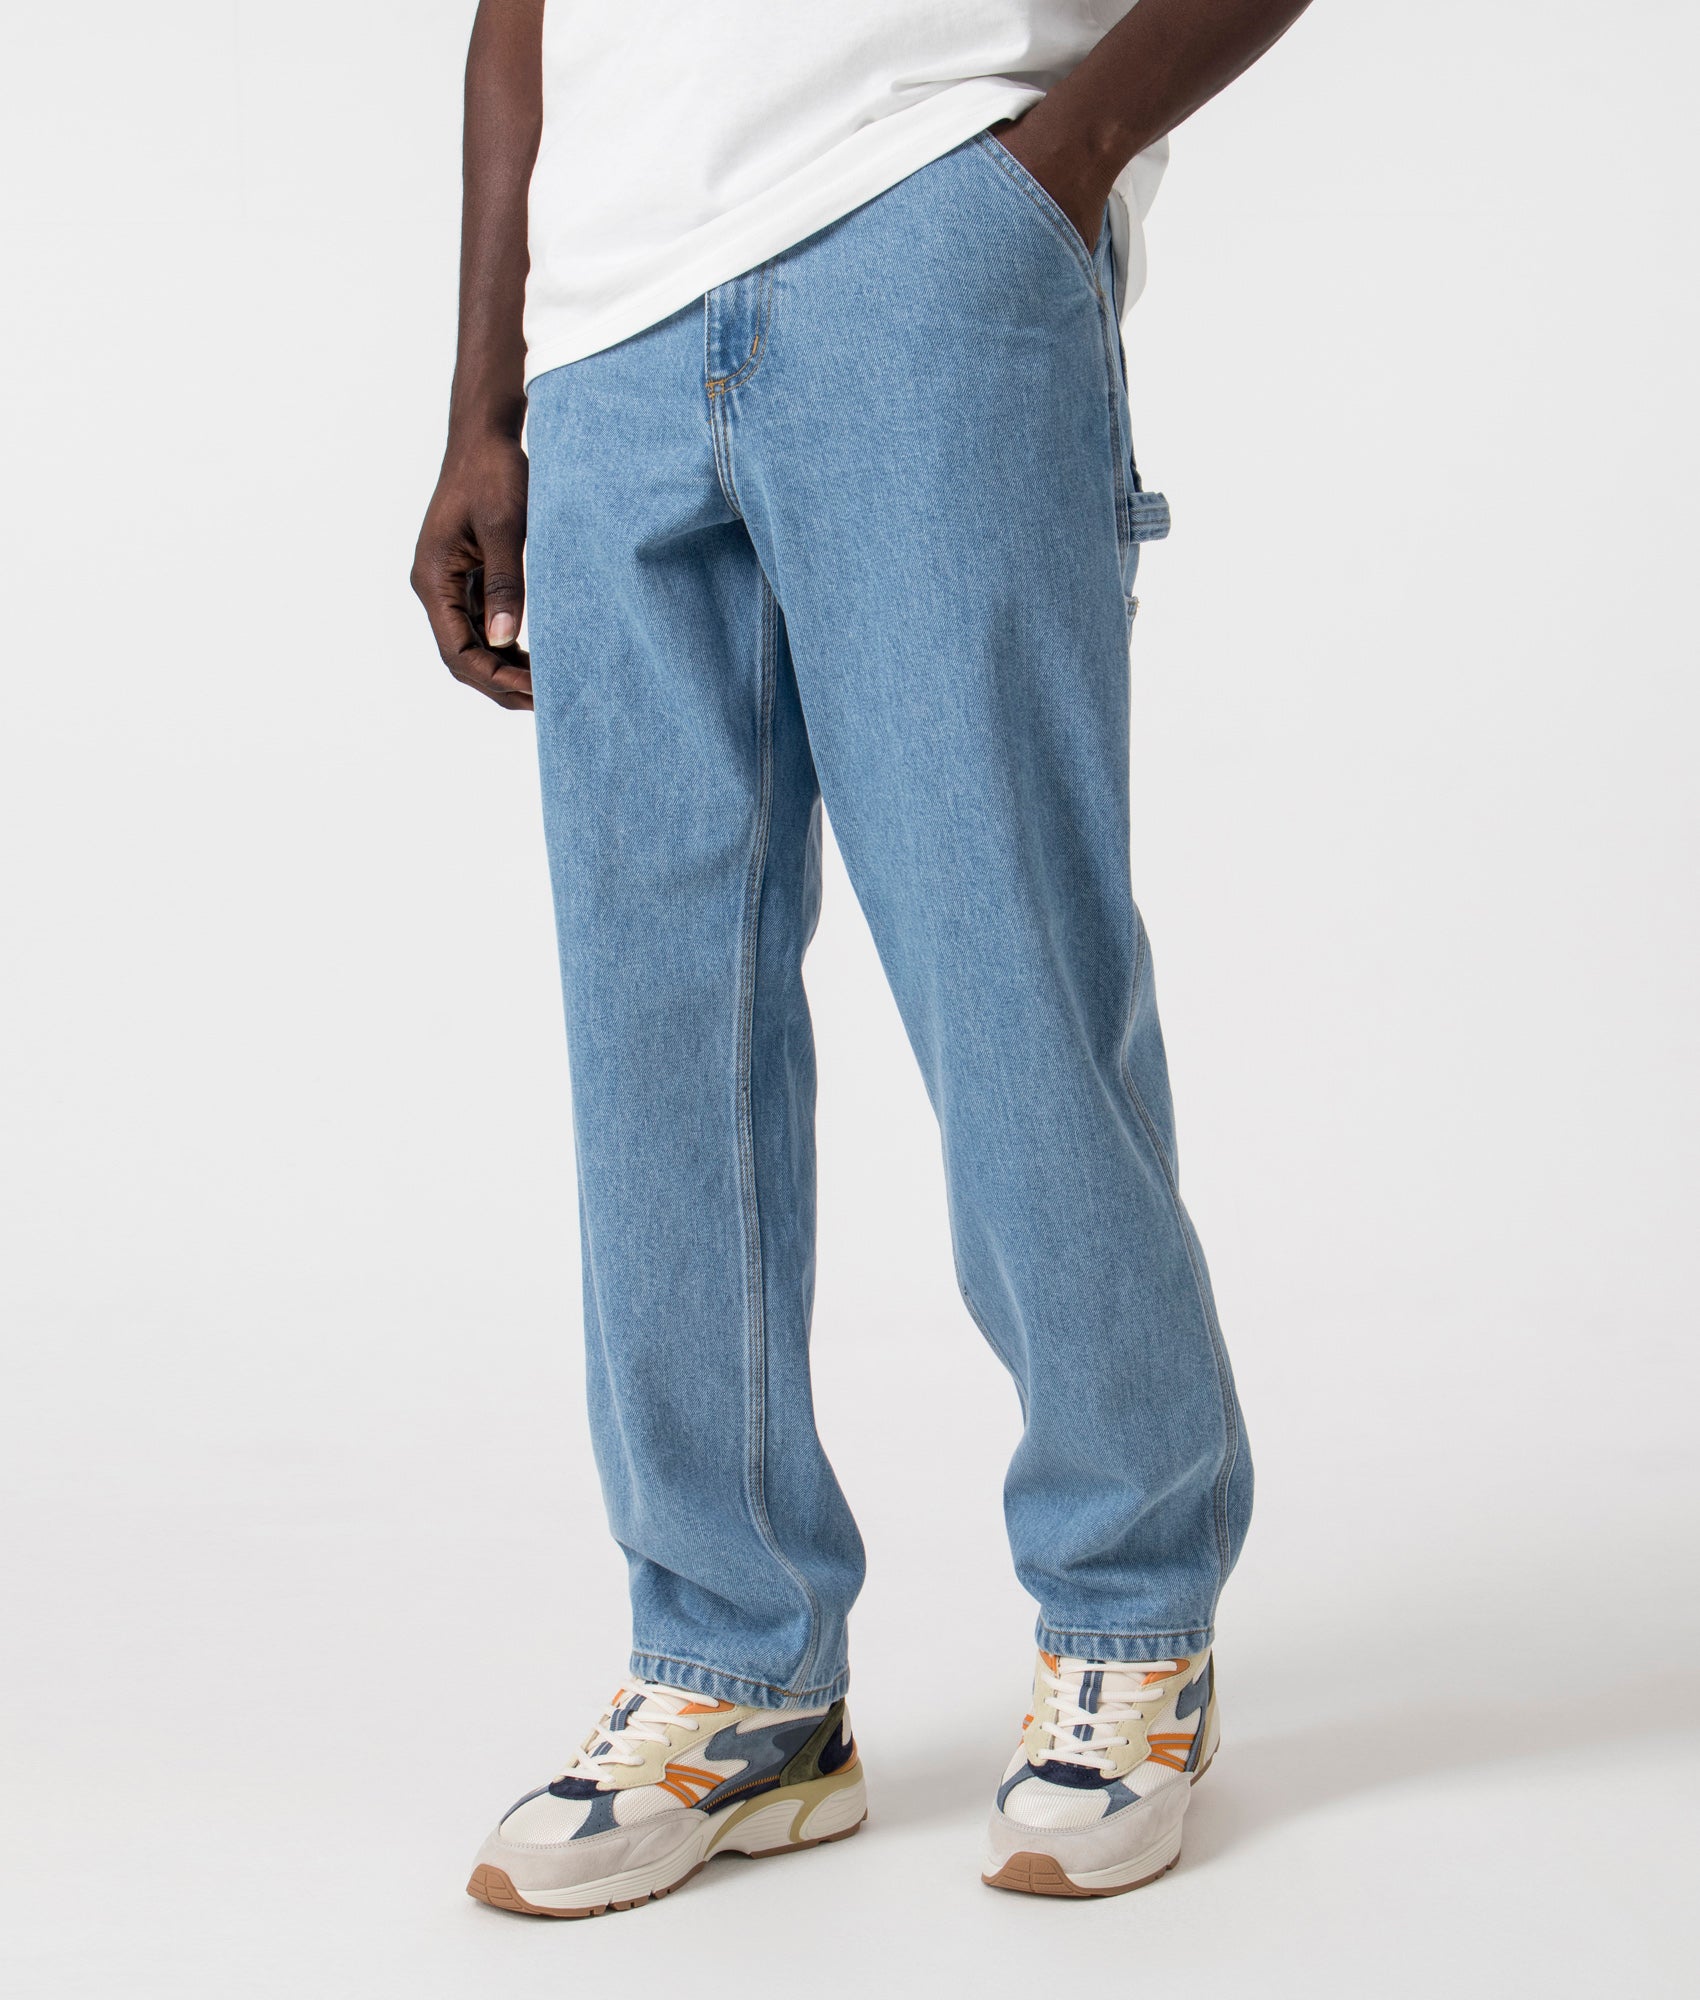 Carhartt WIP Mens Relaxed Fit Single Knee Pants - Colour: 0112 Blue - Size: 34R